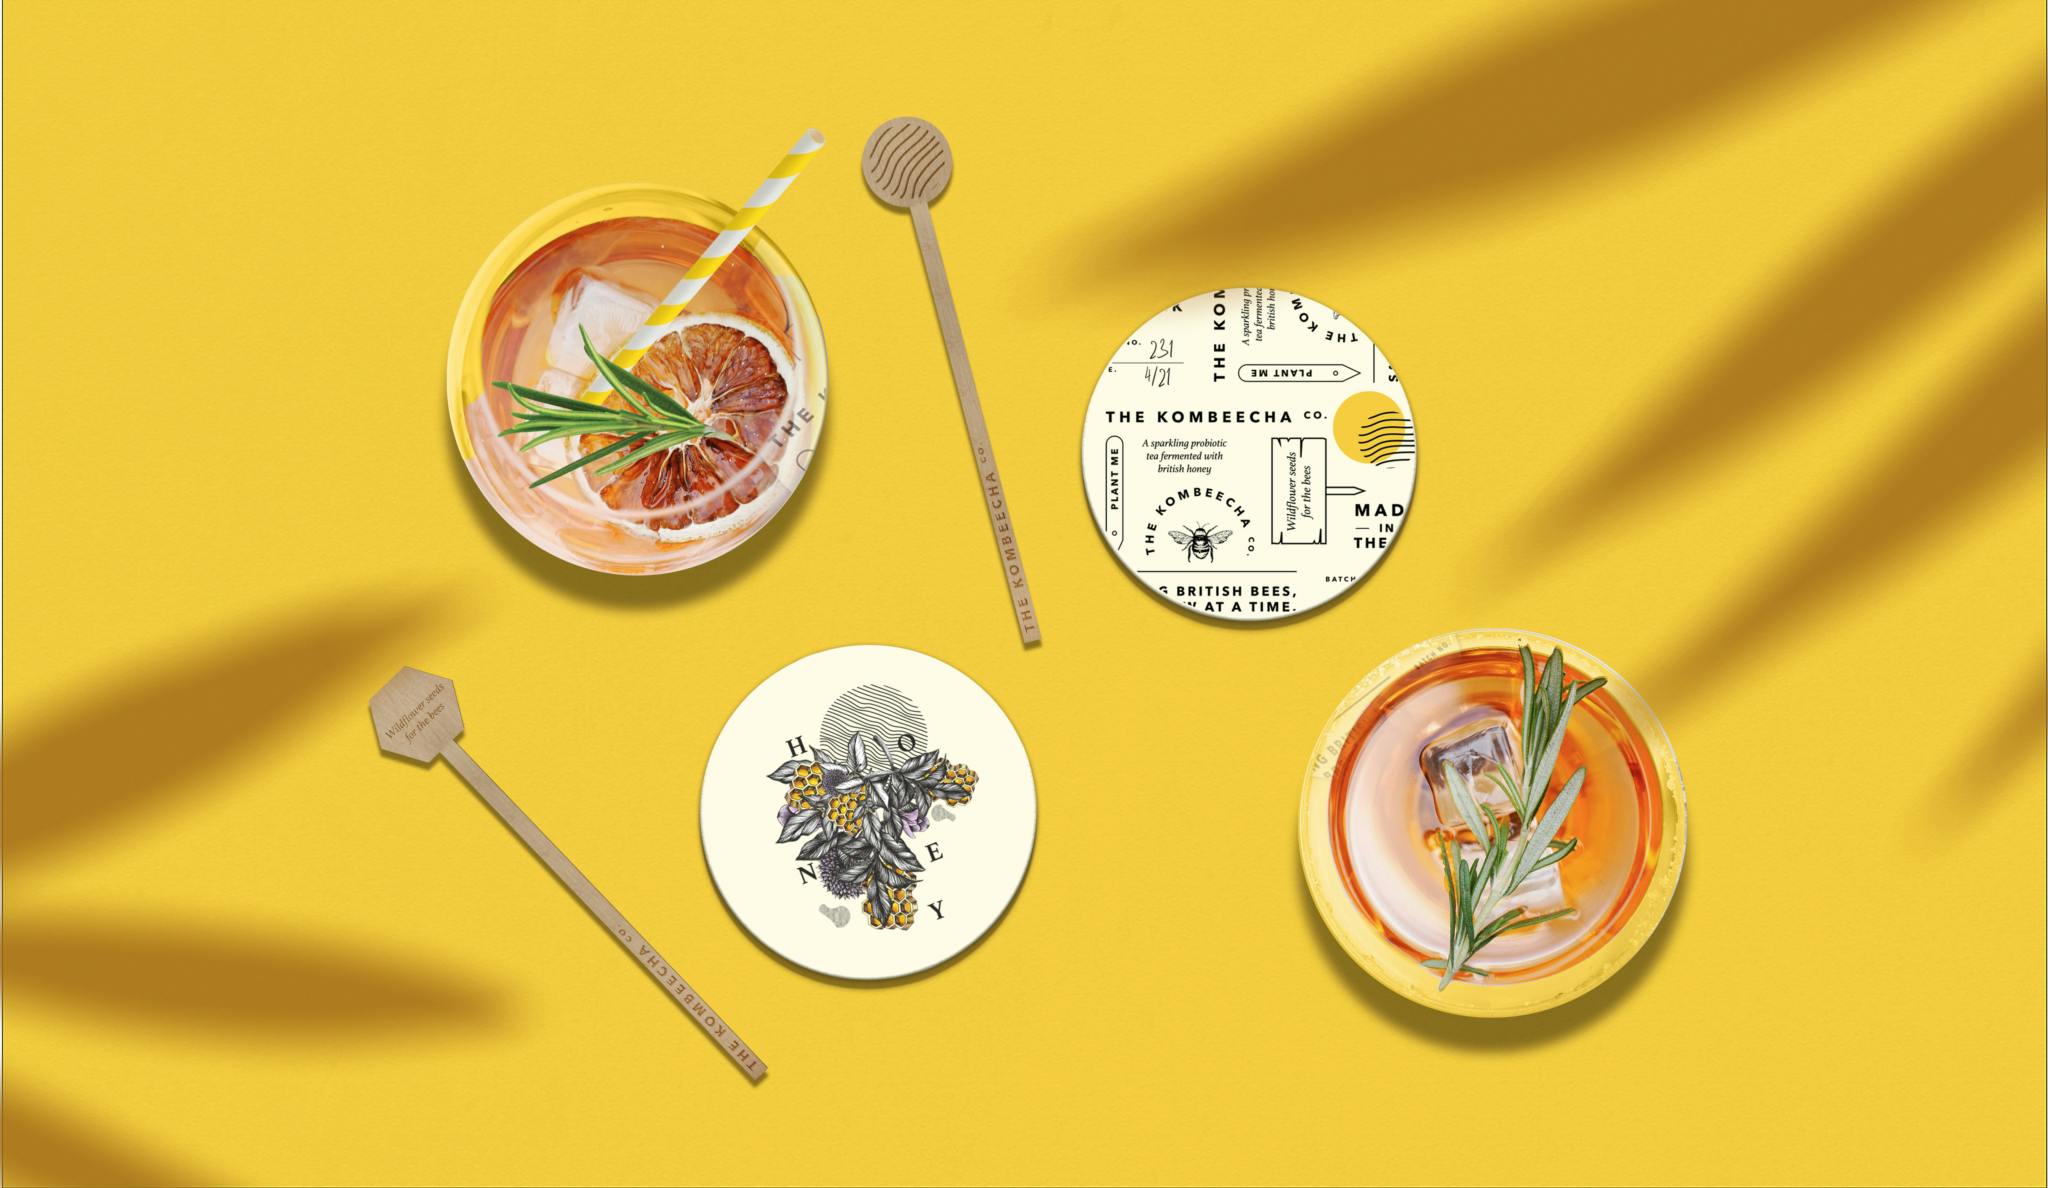 Image shows an overhead view of cocktails featuring stirrers and coasters with the Kombeecha Co. branding which features an illustrated bee and typography